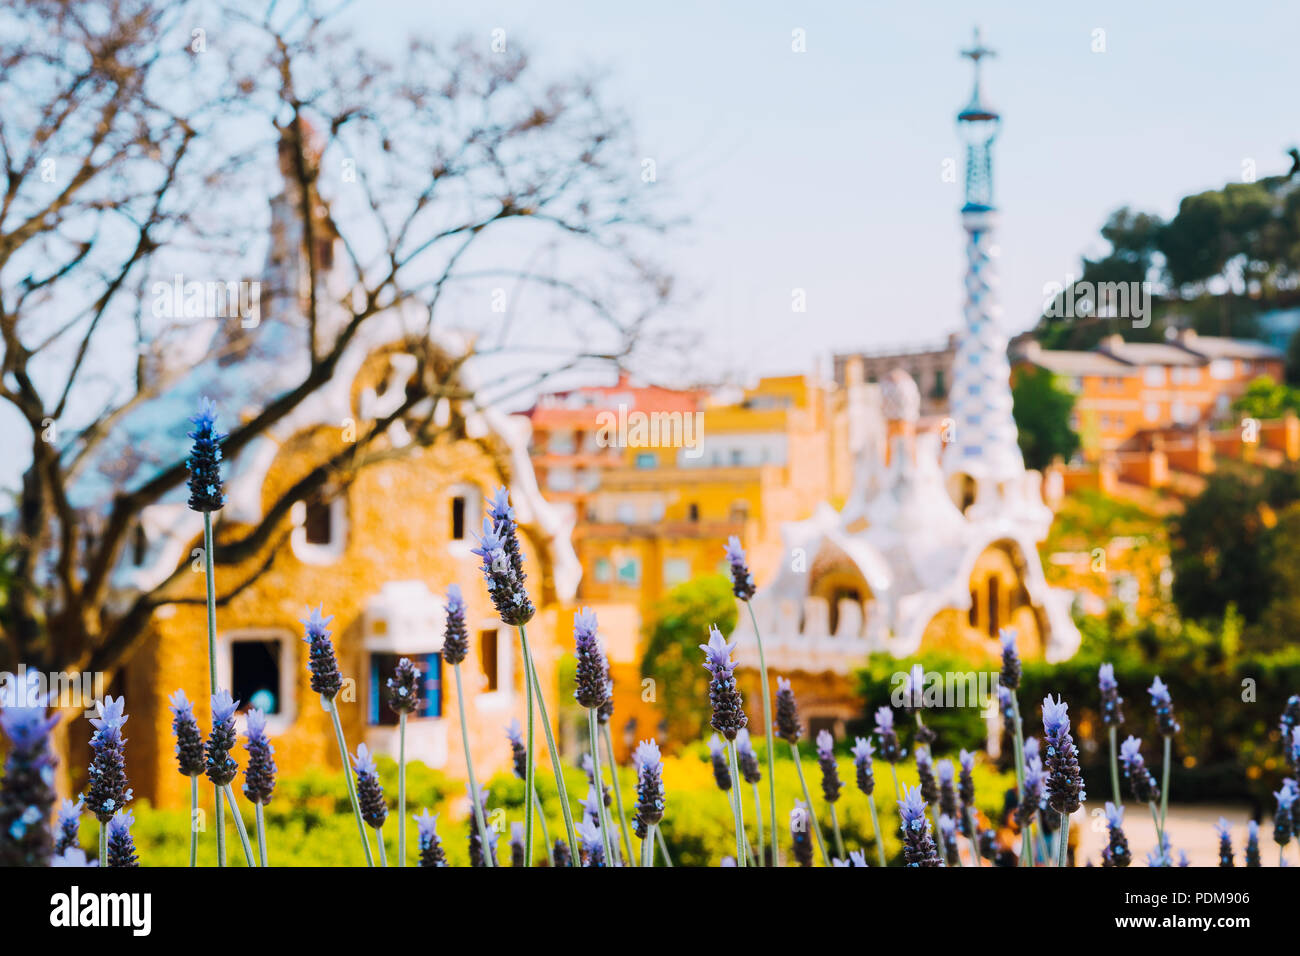 Colorful mosaic building in Park Guell. Violet lavender flower in foreground. Evening warm Sun light, Barcelona, Spain Stock Photo